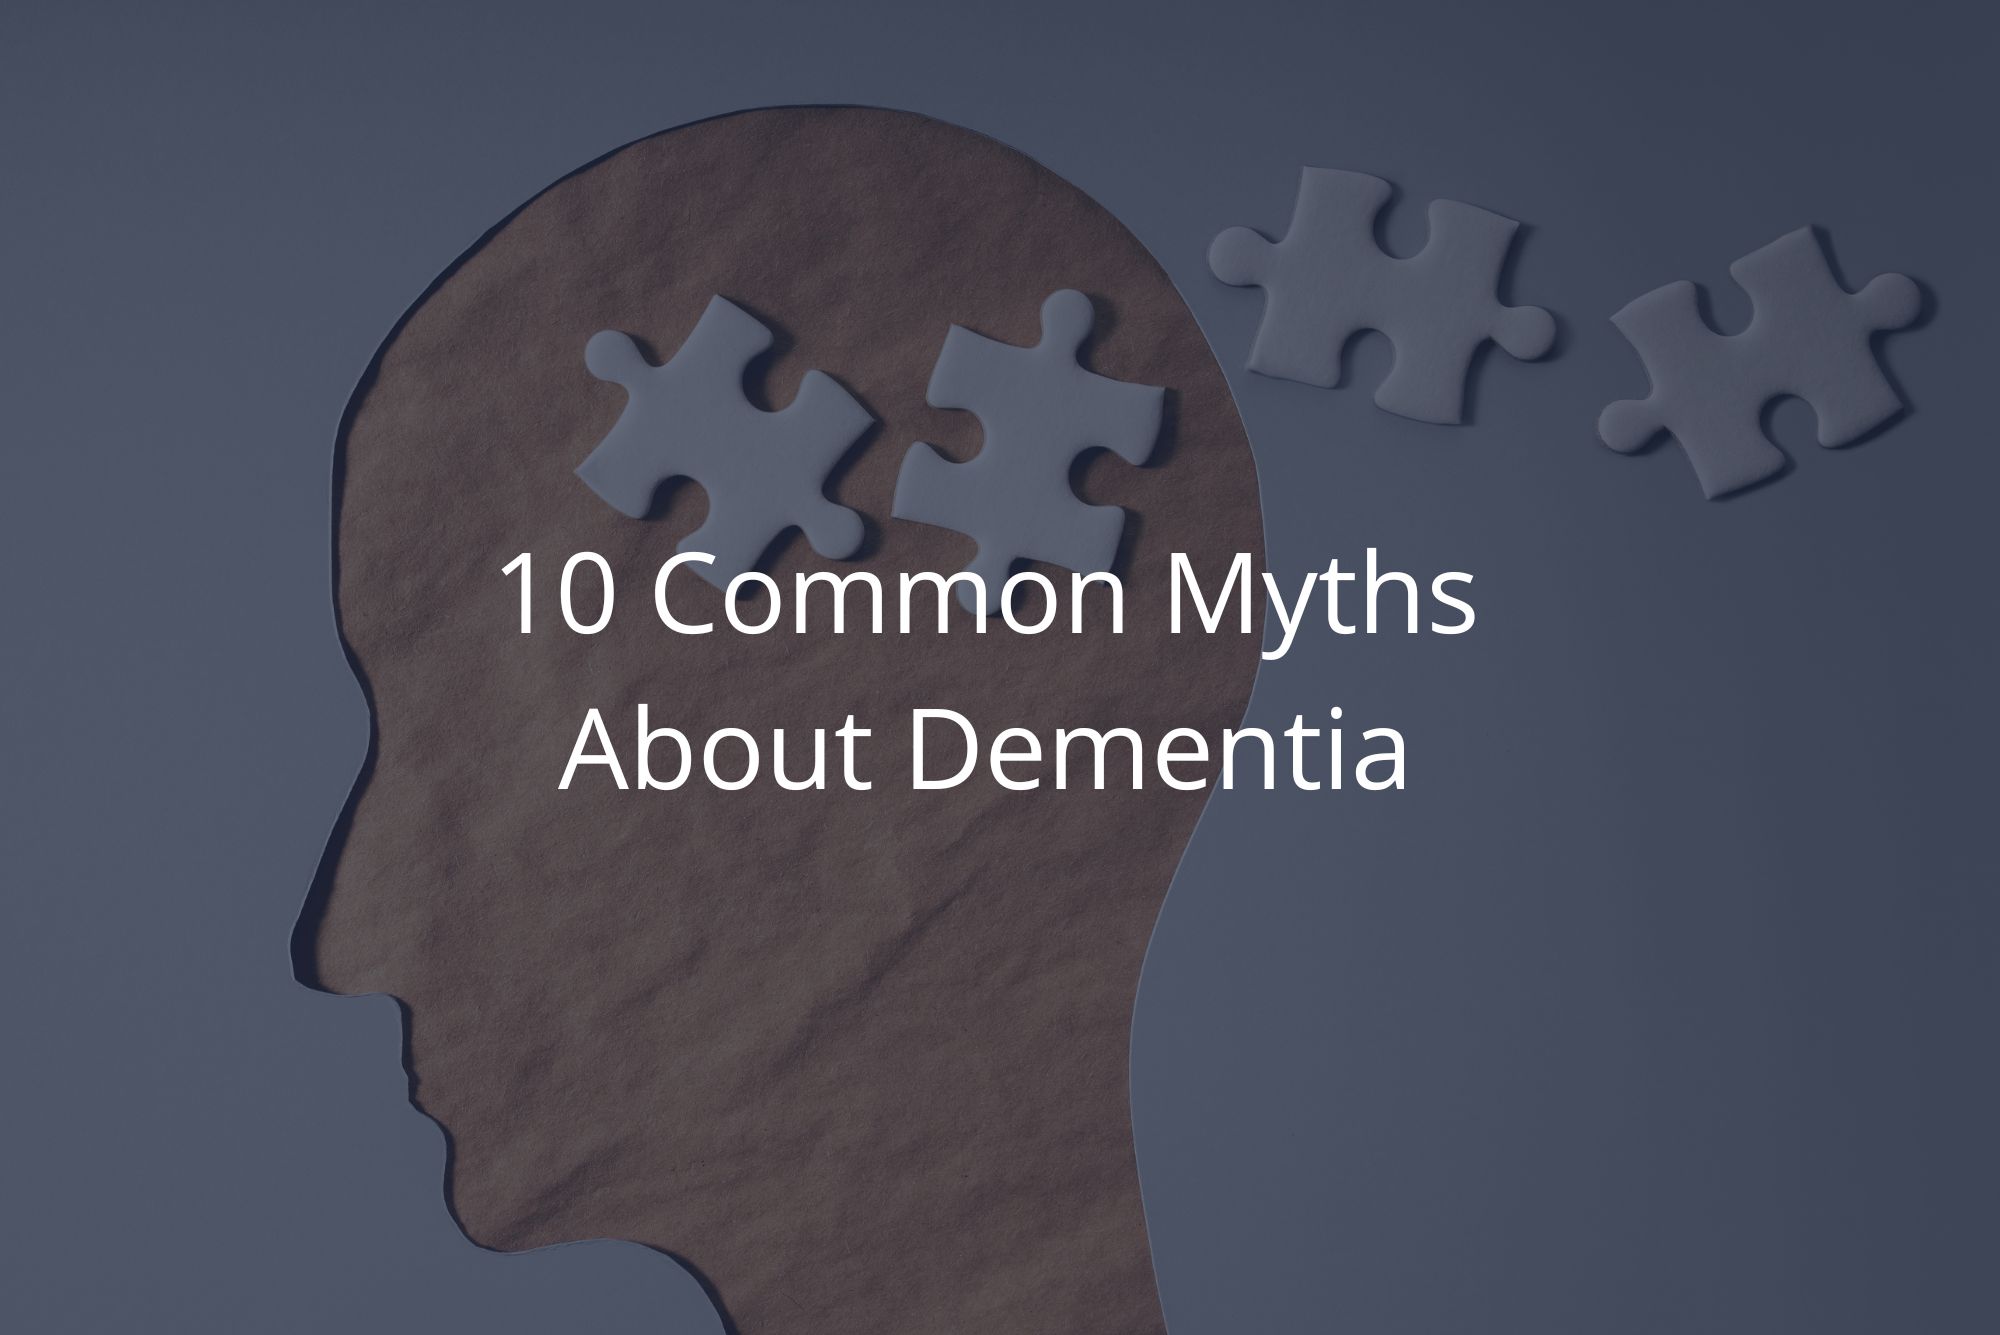 A paper cut-out of a head with 4 white puzzle pieces represents common myths about dementia with a dark overlay.